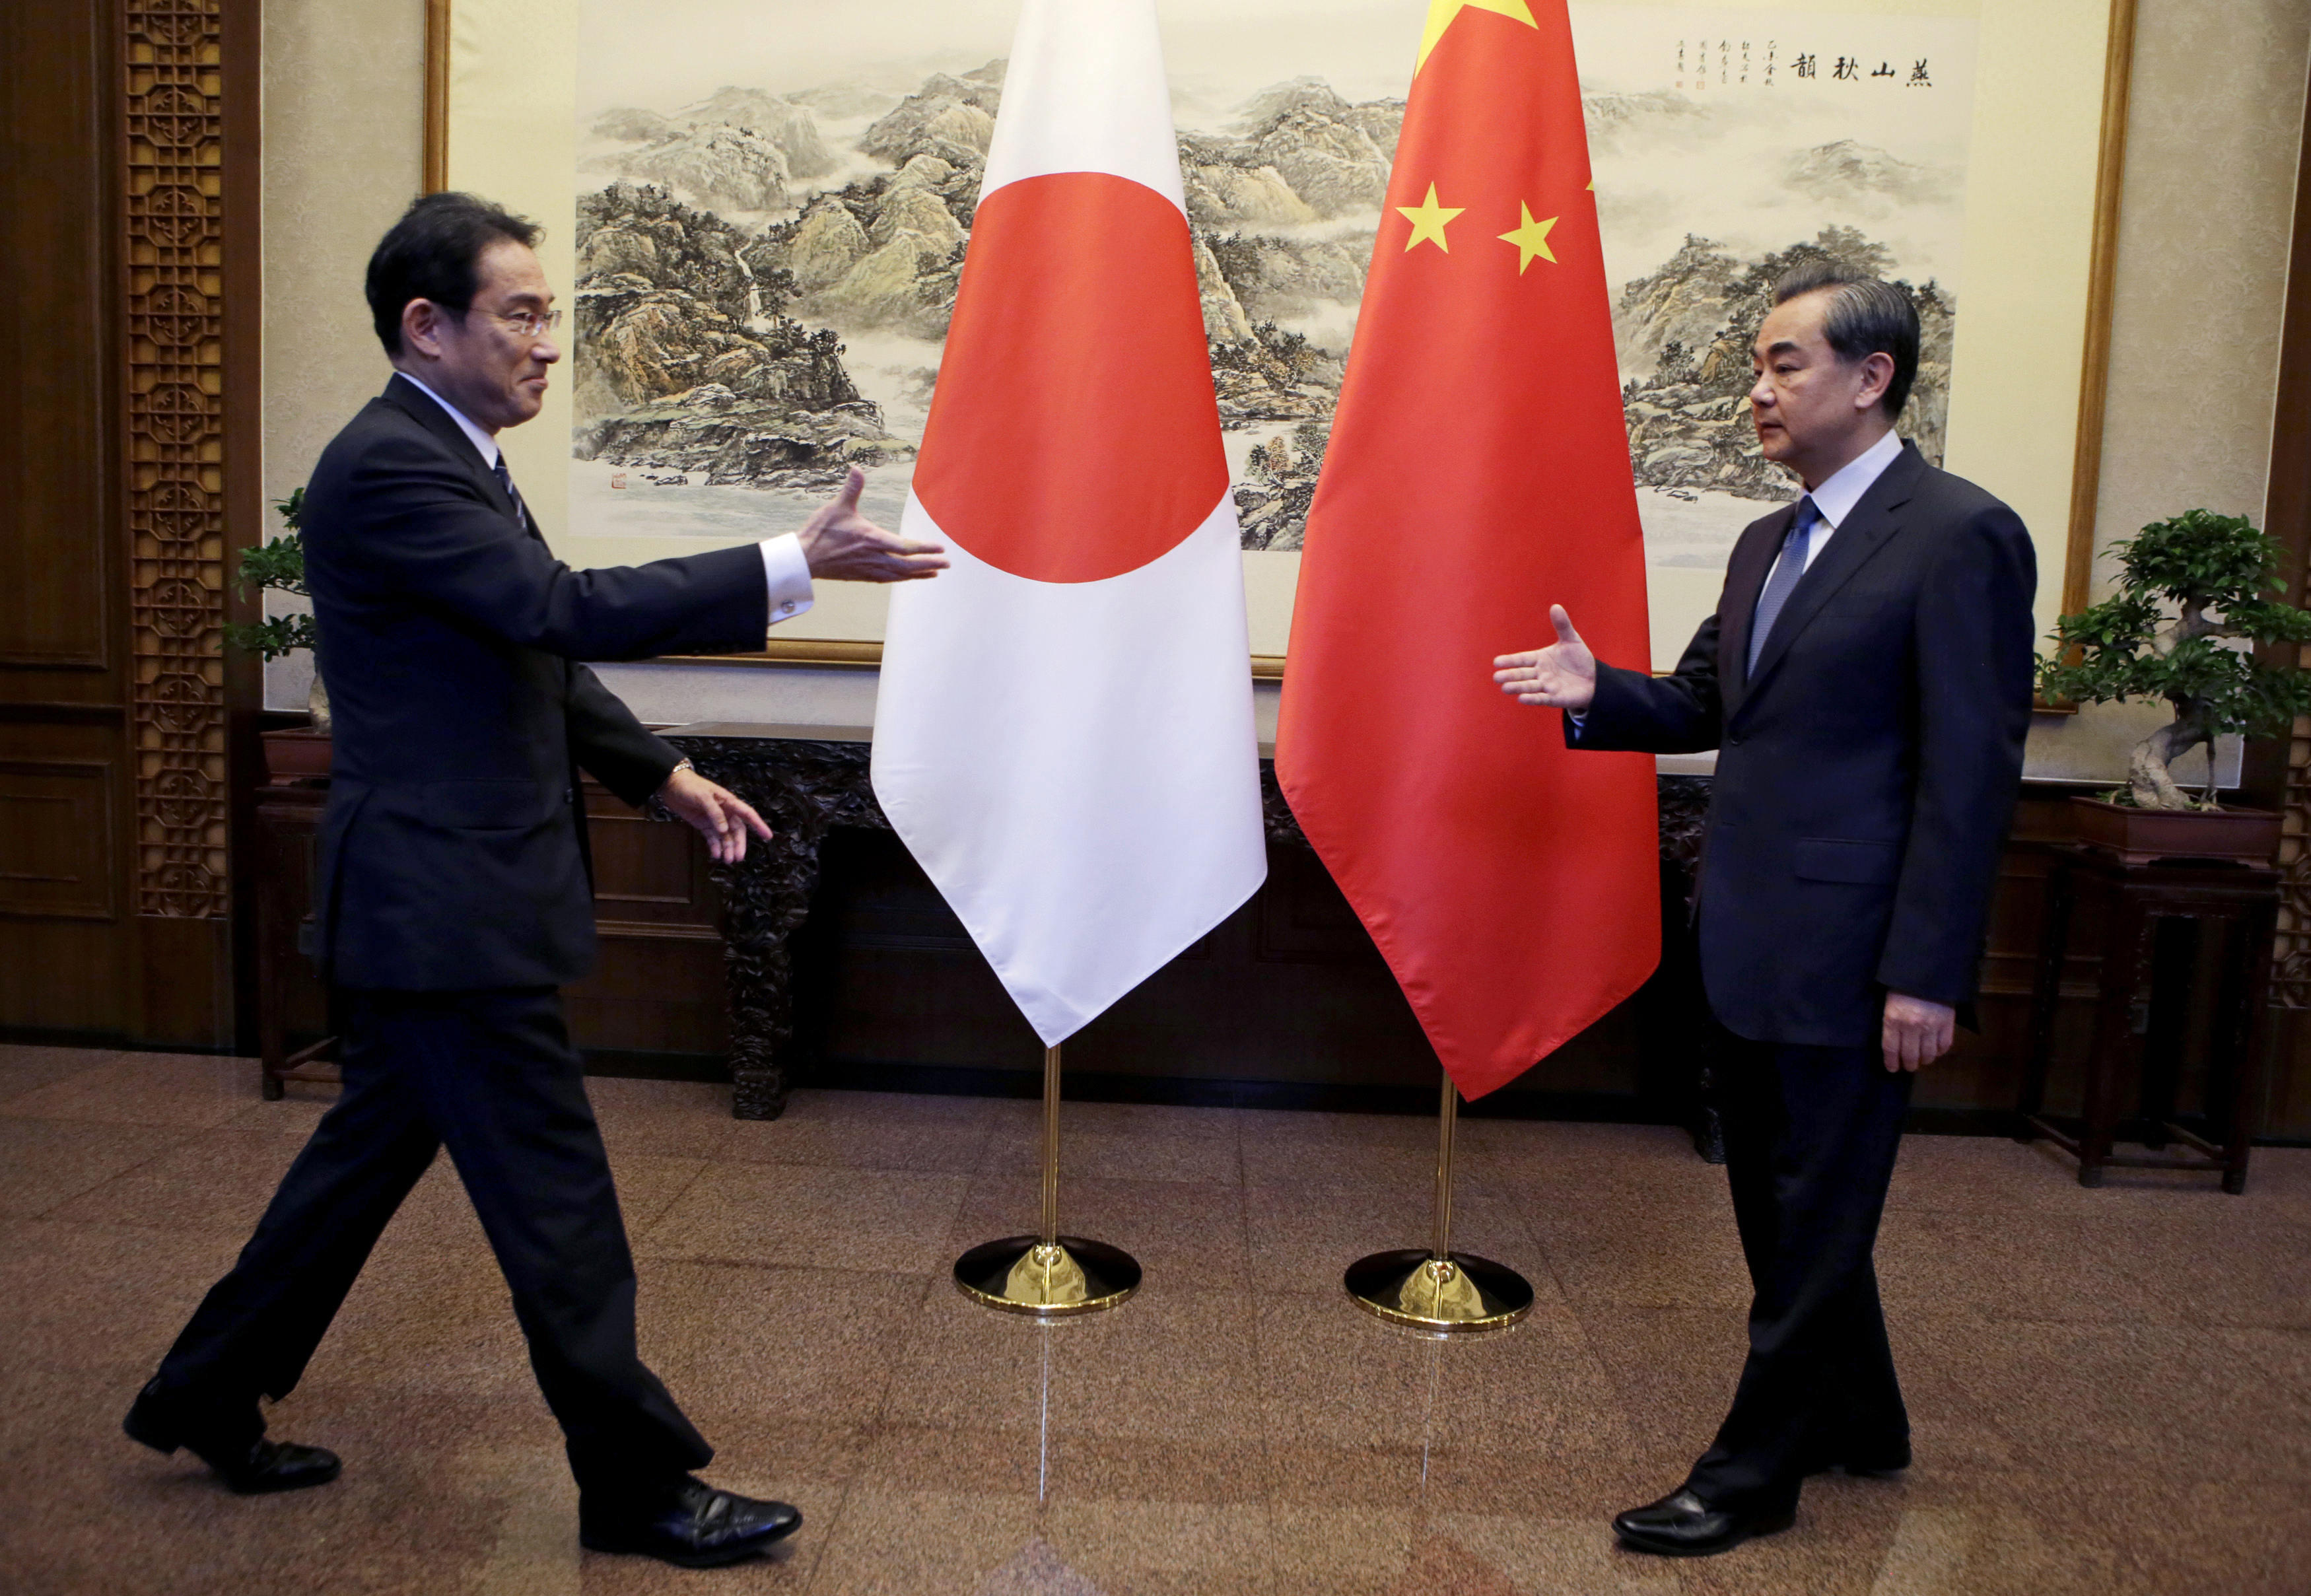 Foreign Minister Fumio Kishida (left) reaches out to shake hands with his Chinese counterpart, Wang Yi, during a meeting at Diaoyutai State Guesthouse in Beijing on Saturday.  pool / ap | KYODO